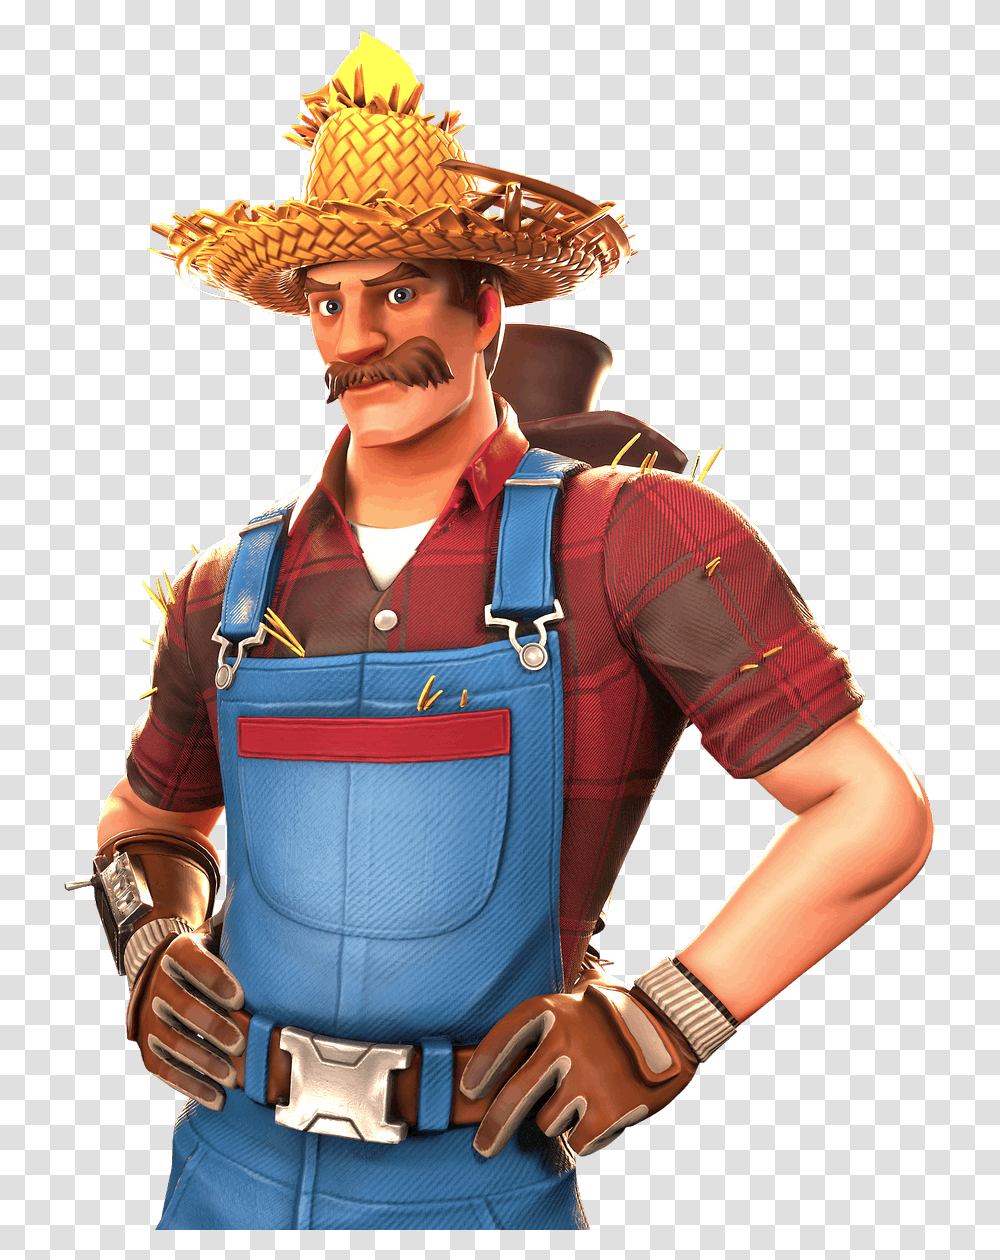 Hayseed Fortnite Skin Render Free To Use Let Me Know Fortnite Skin Renders, Hat, Costume, Person Transparent Png